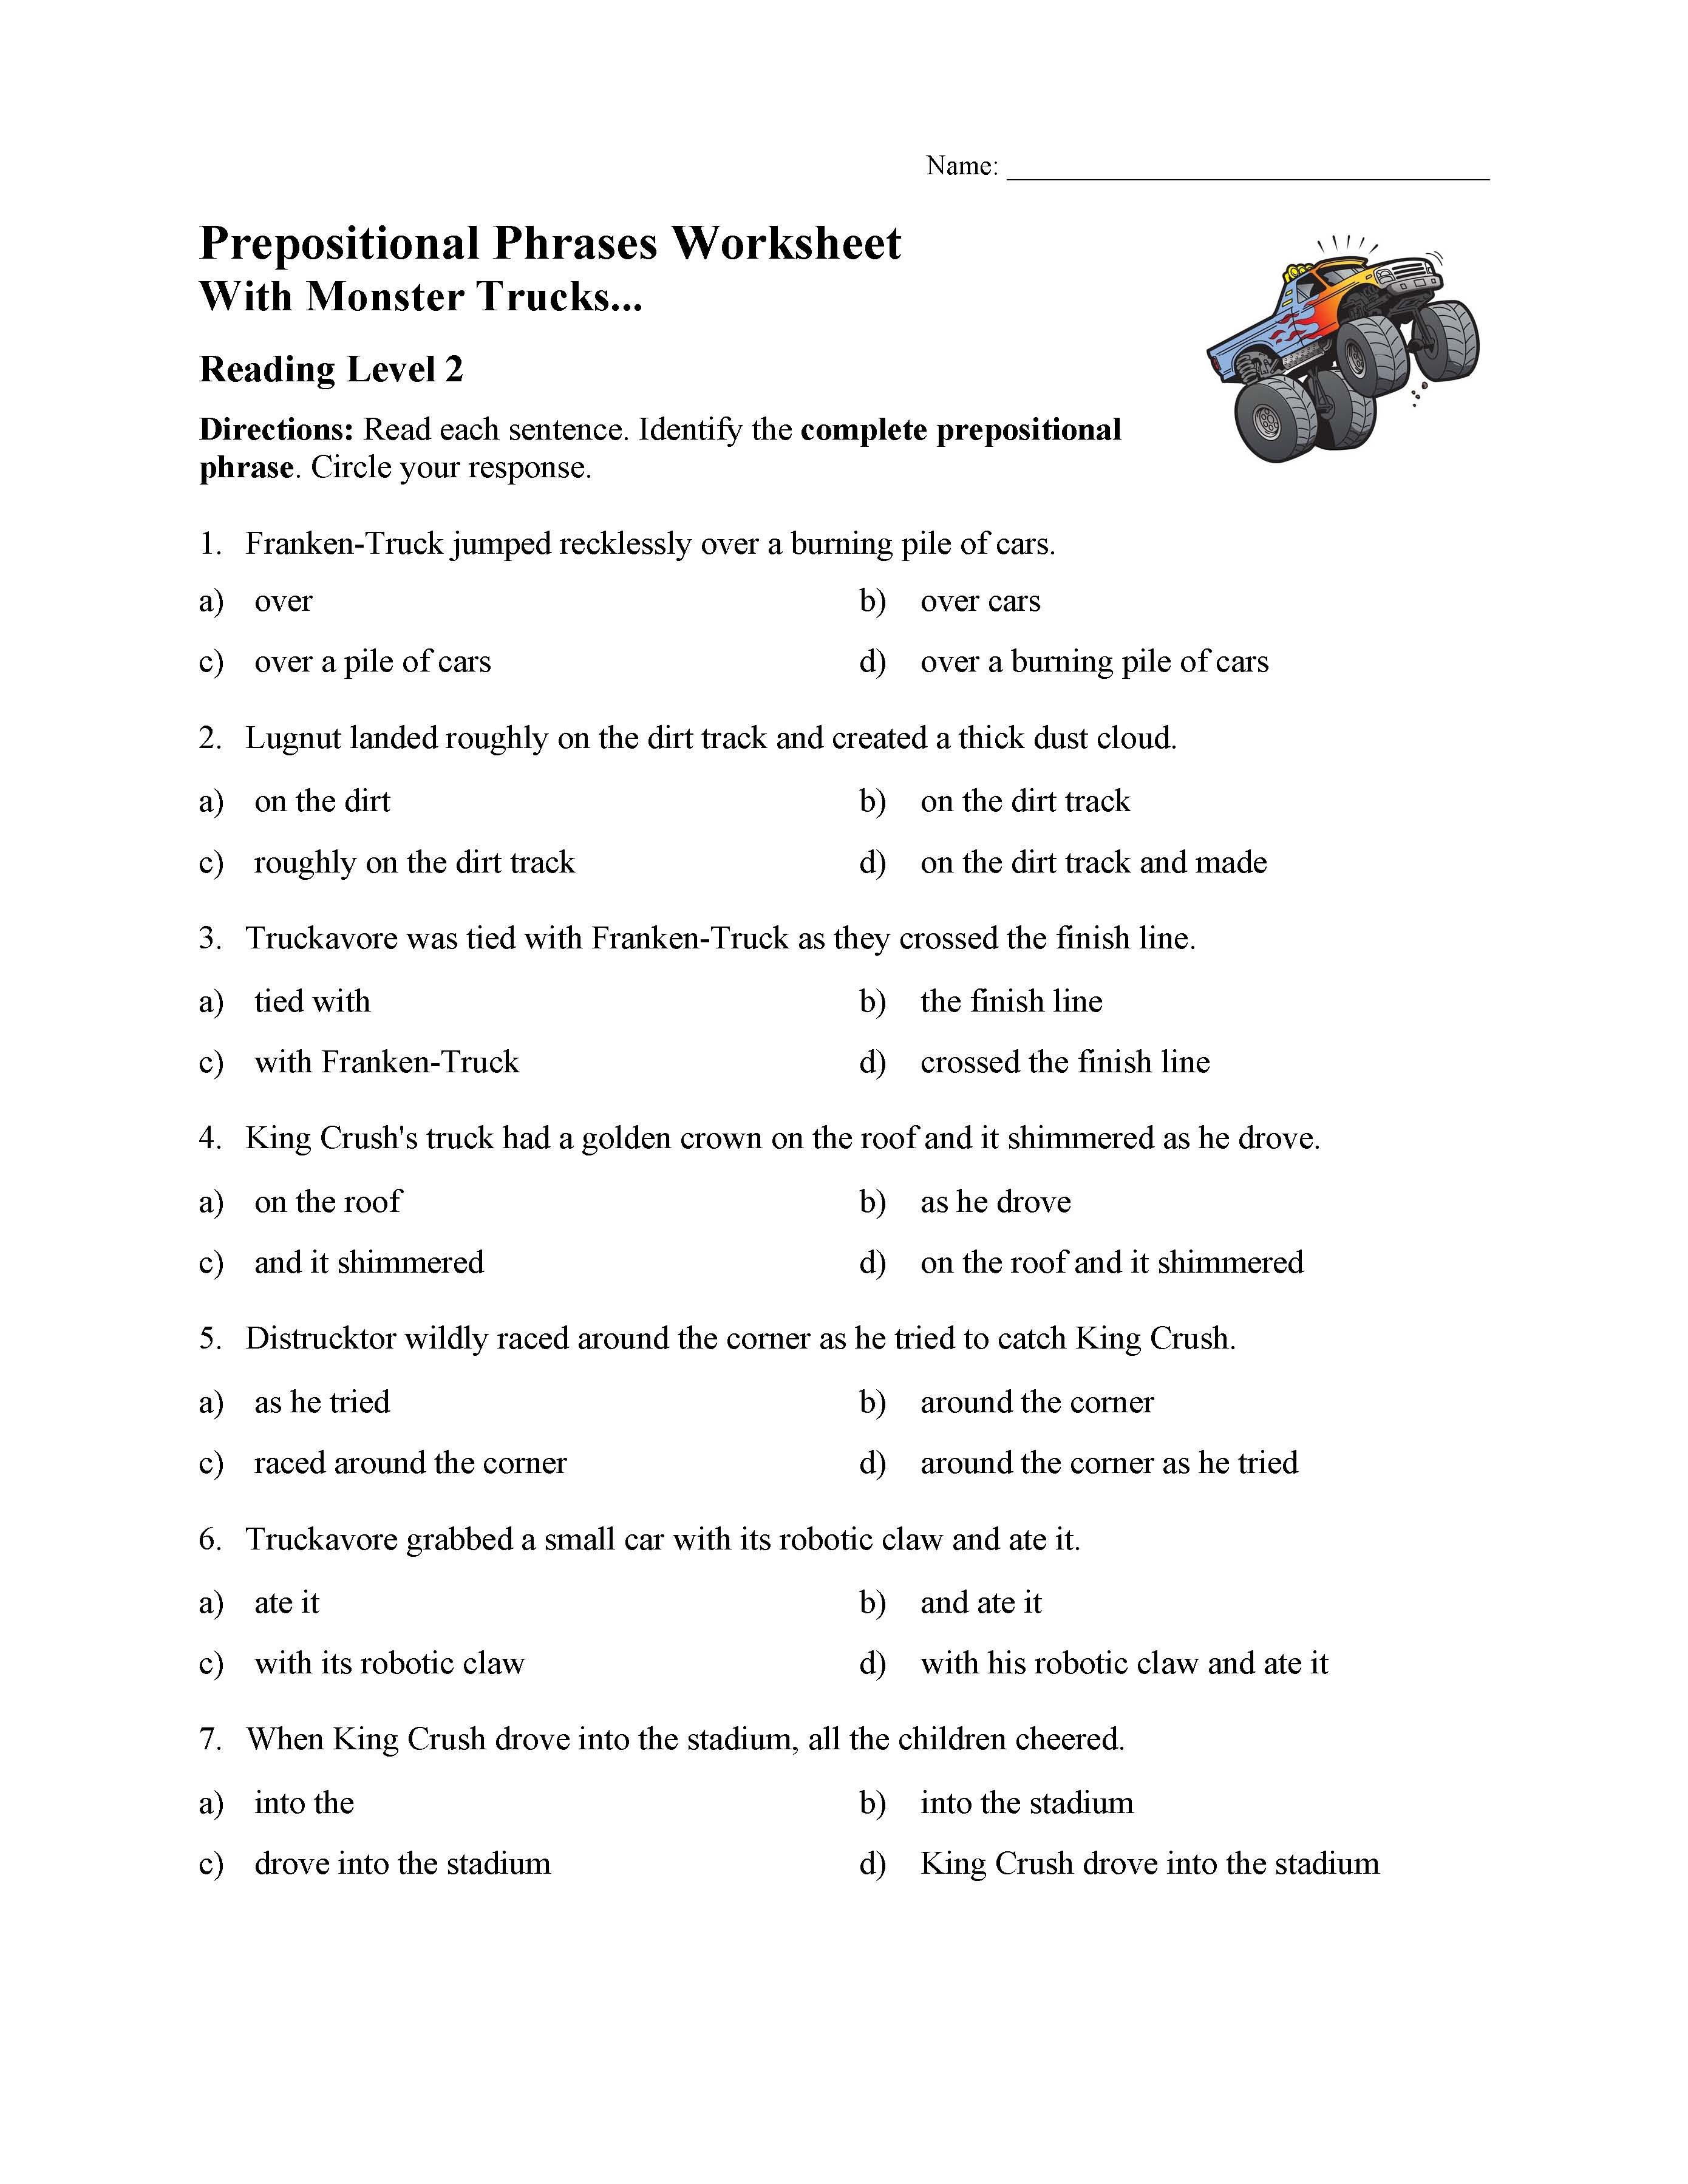 prepositional-phrases-worksheet-with-monster-trucks-parts-of-speech-activity